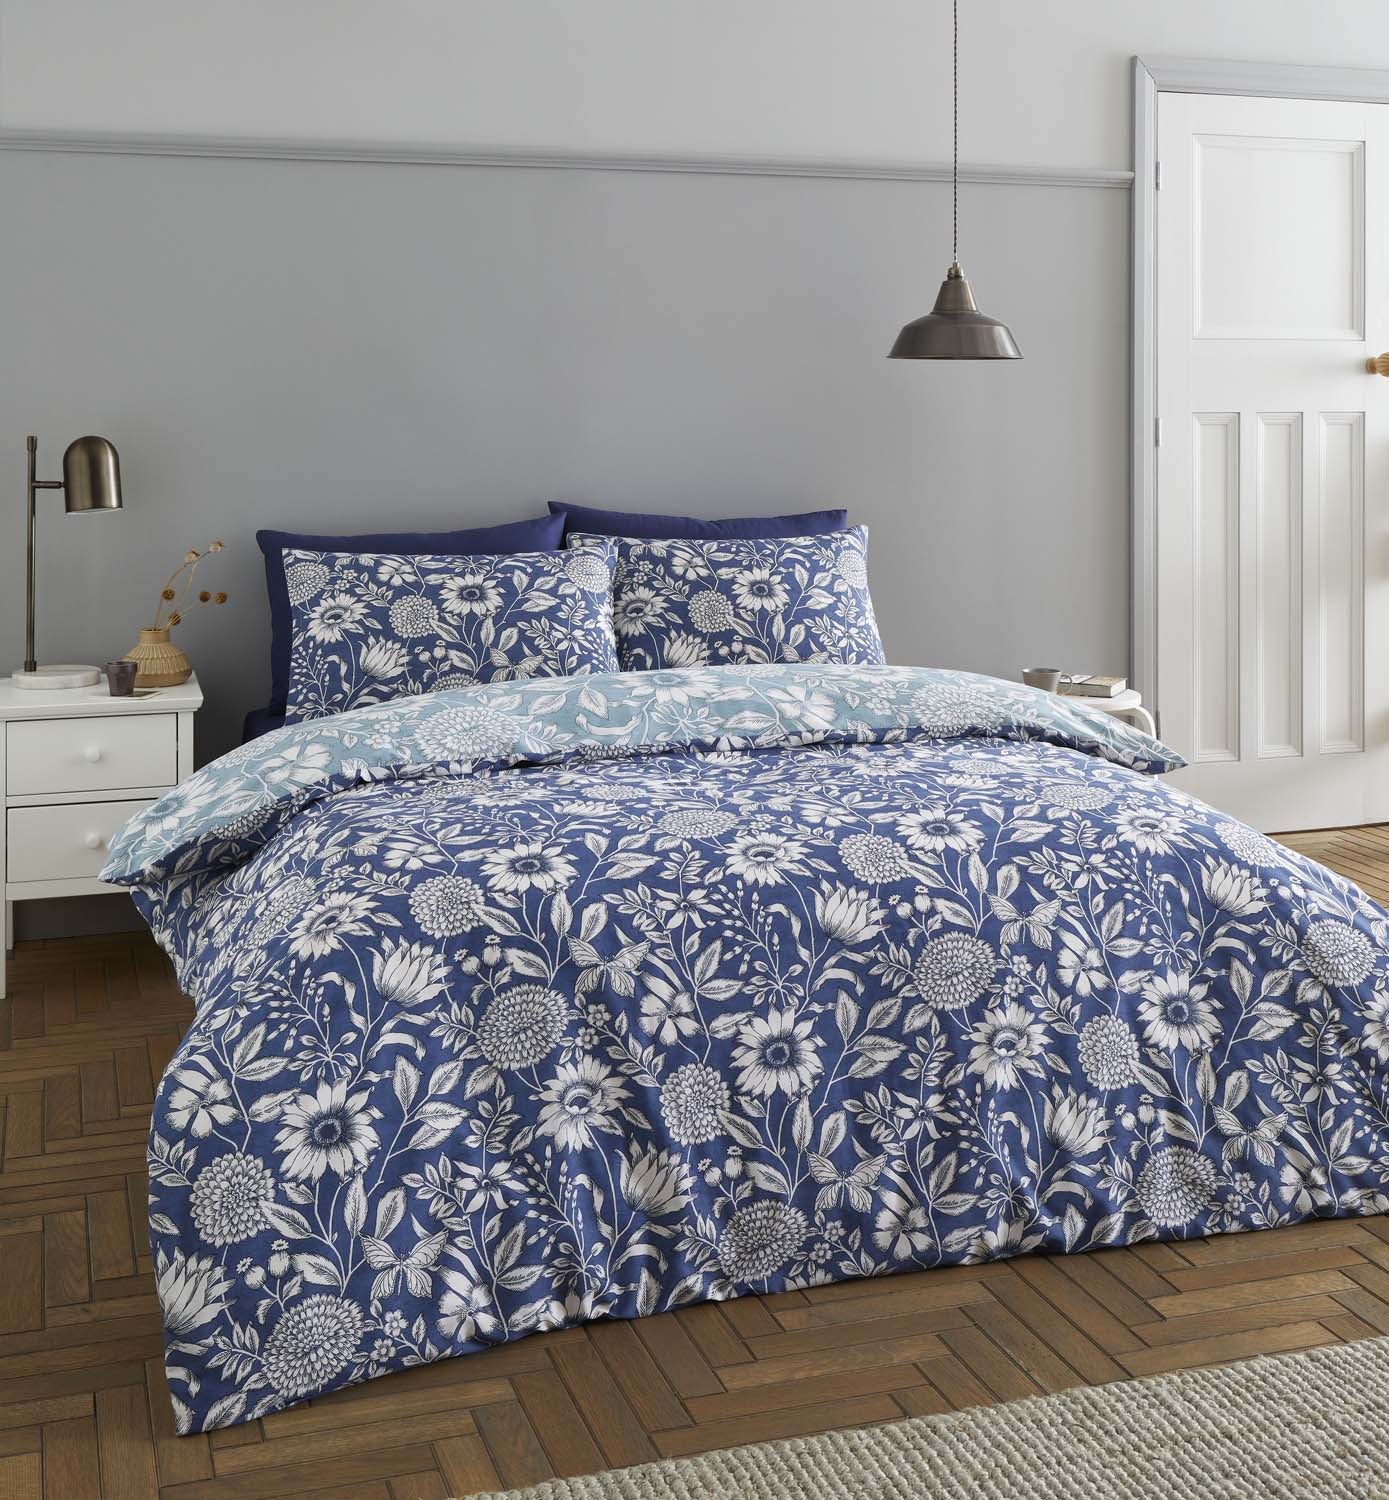  Catherine Lansfield Tapestry Floral Easy Care Duvet Cover Set - Blue 2 Shaws Department Stores